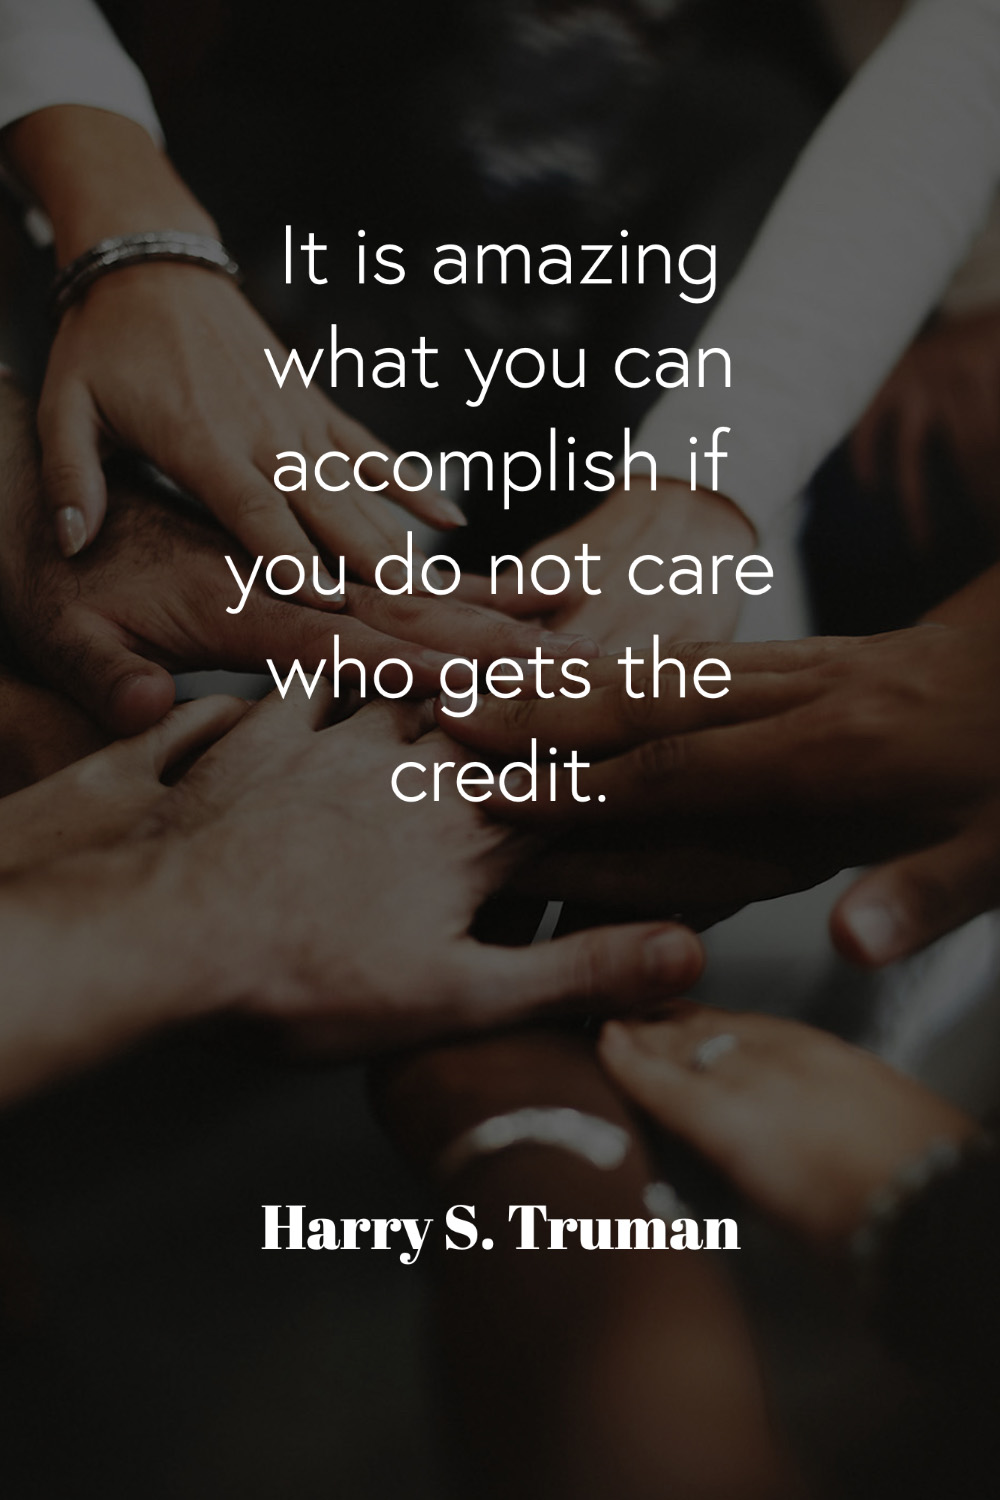 Quote by Harry S. Truman